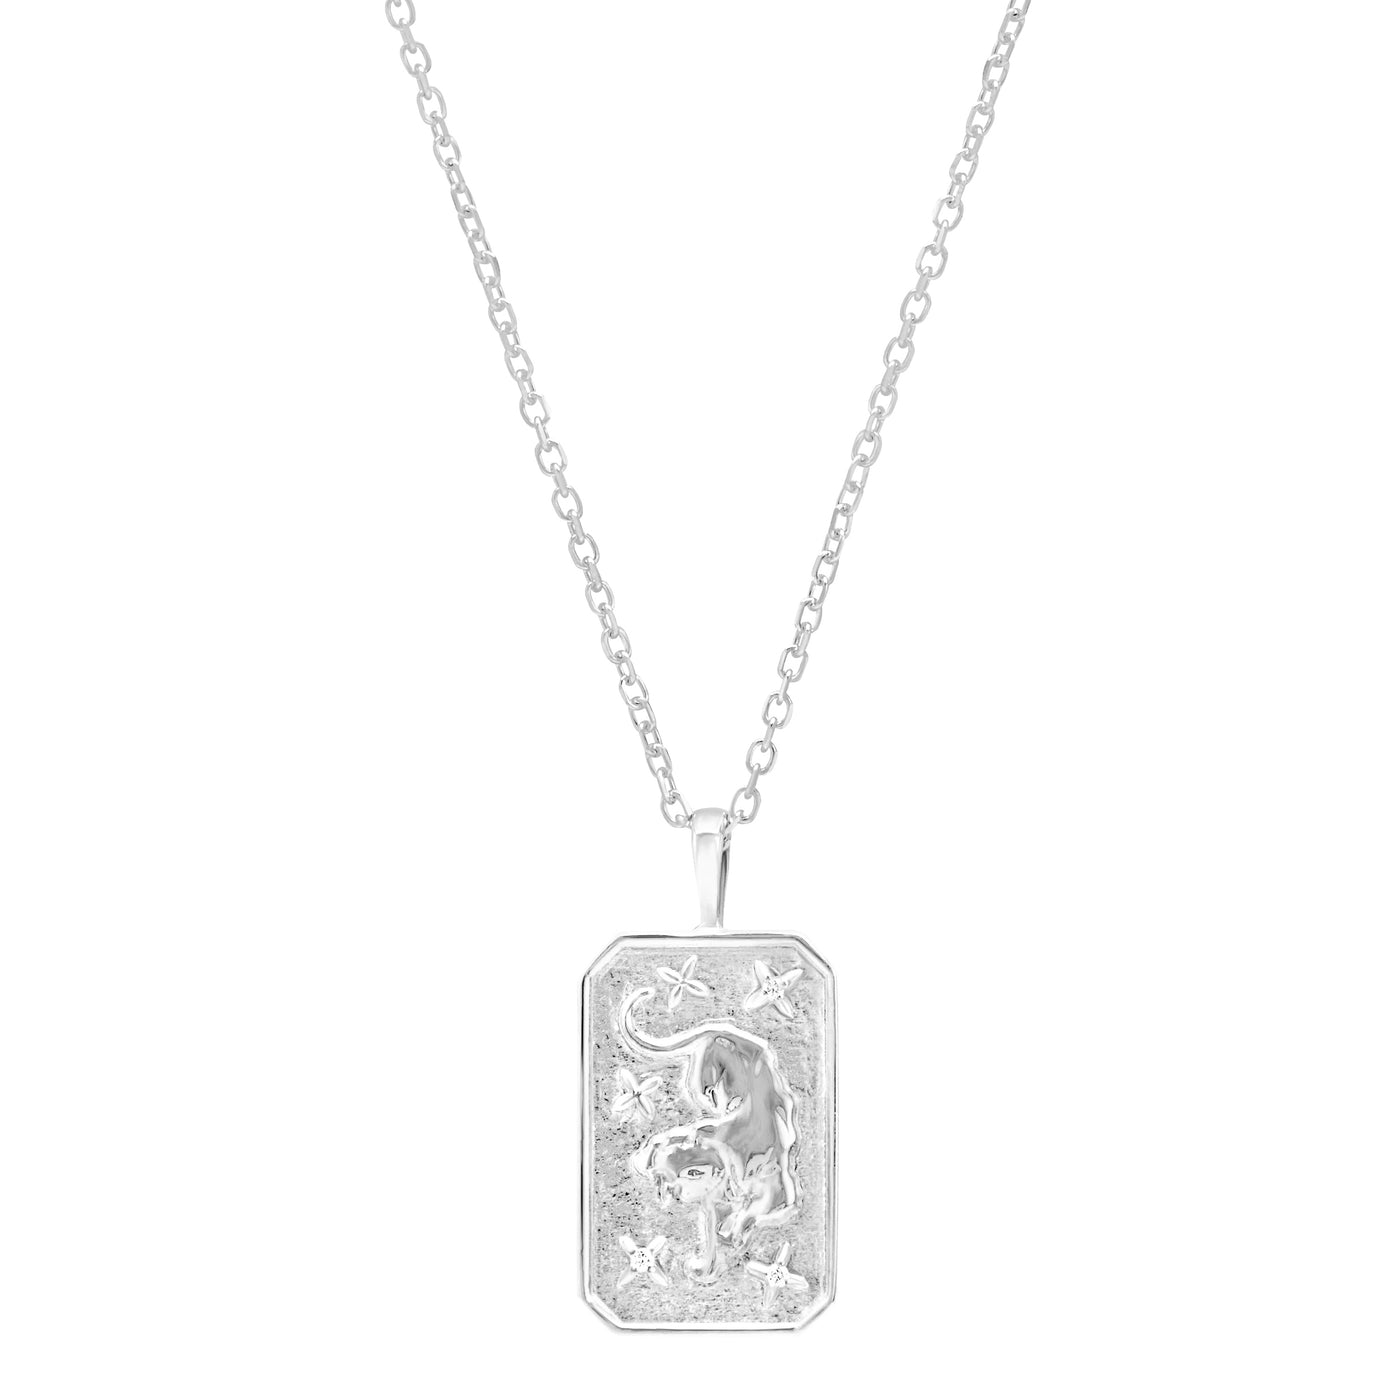 Tiger pendent white gold with cable chain on white background with diamond details